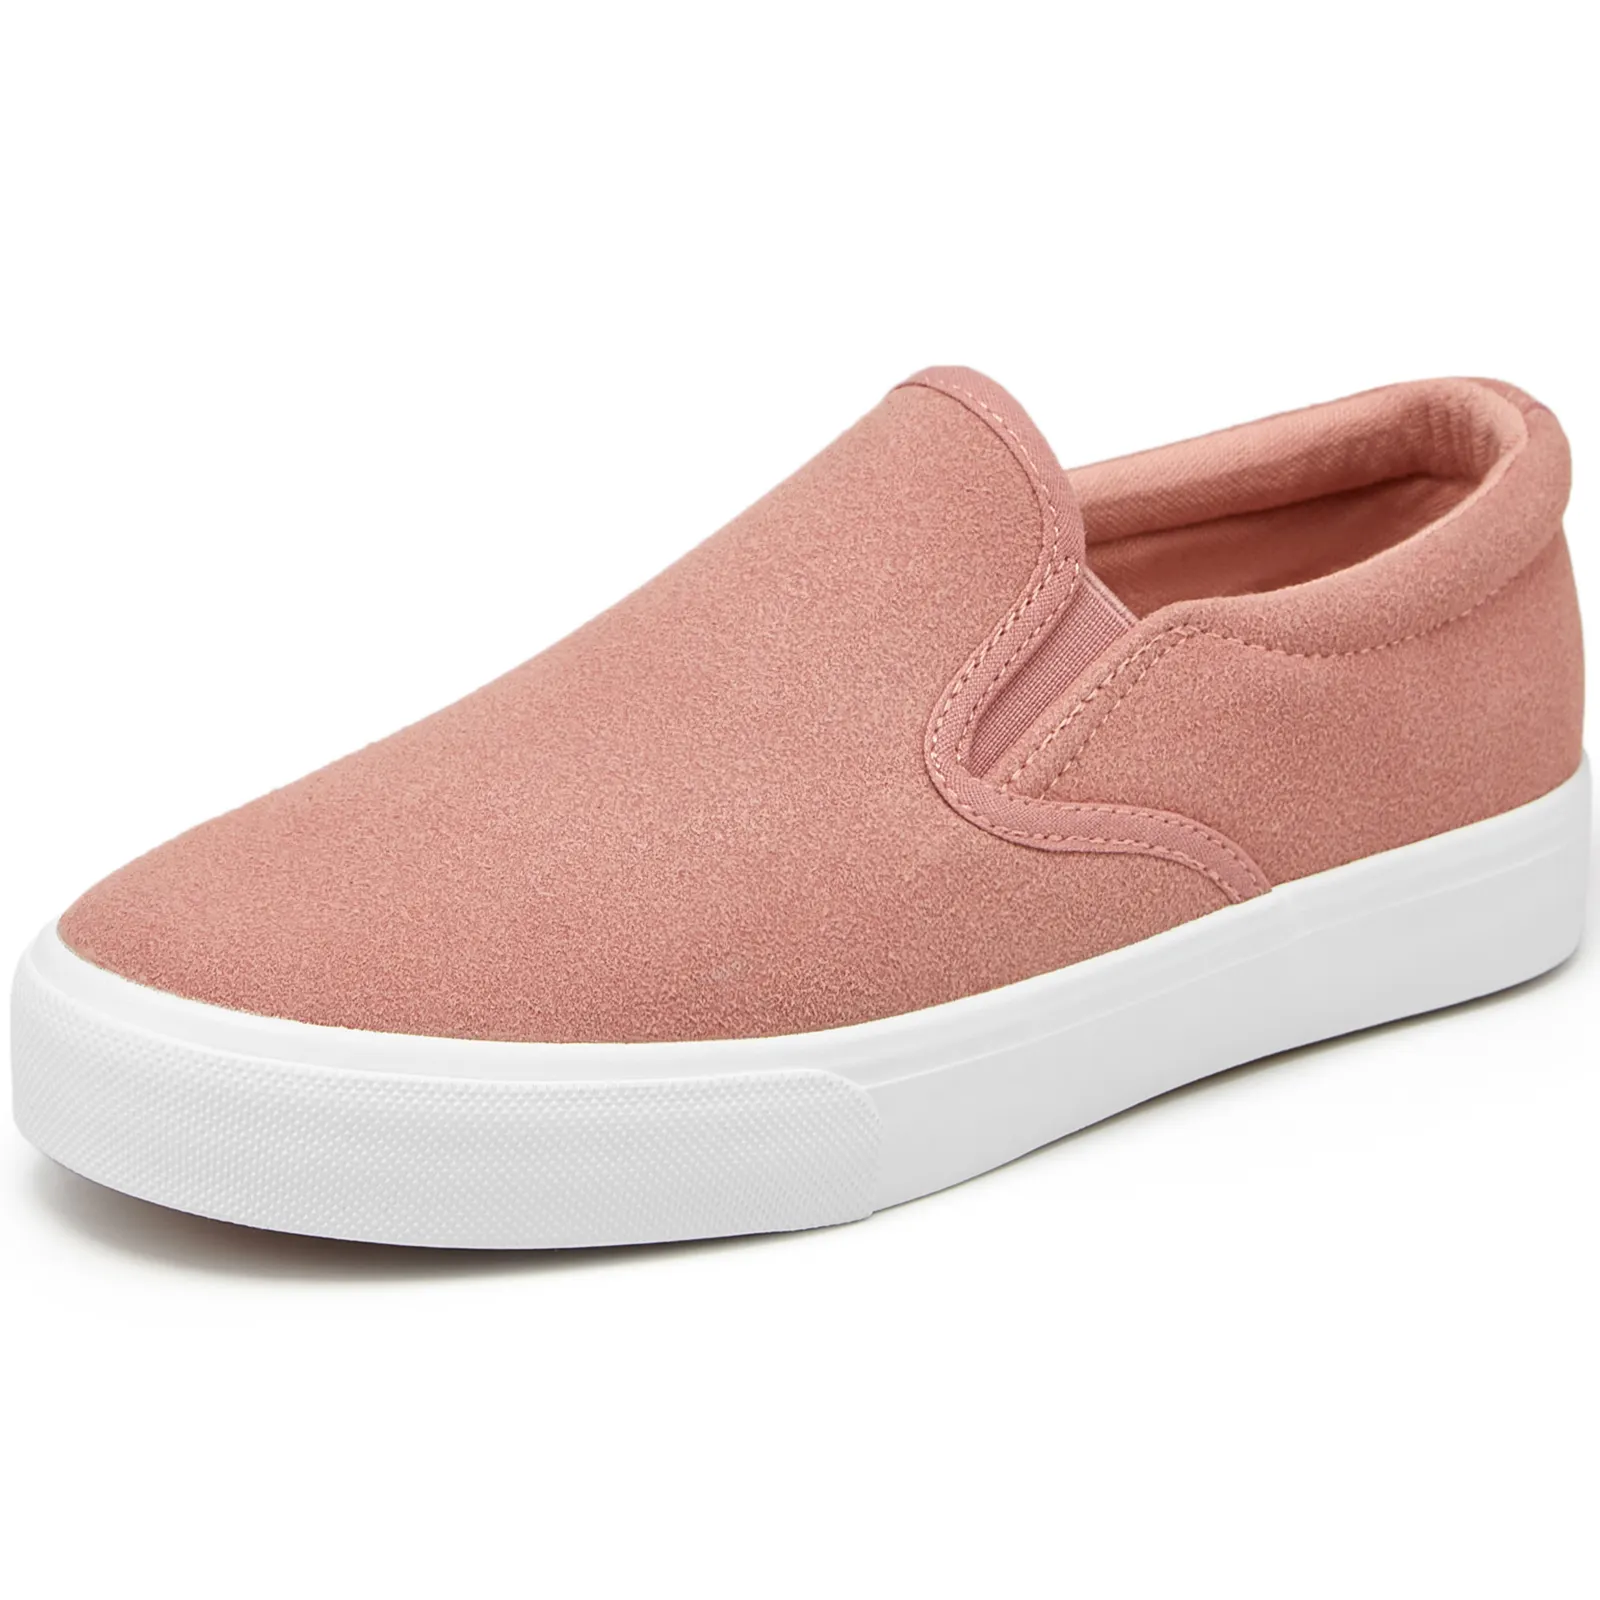 Custom Blank Canvas Shoes Casual Shoes Non-slip Wear Casual Shoes For Women